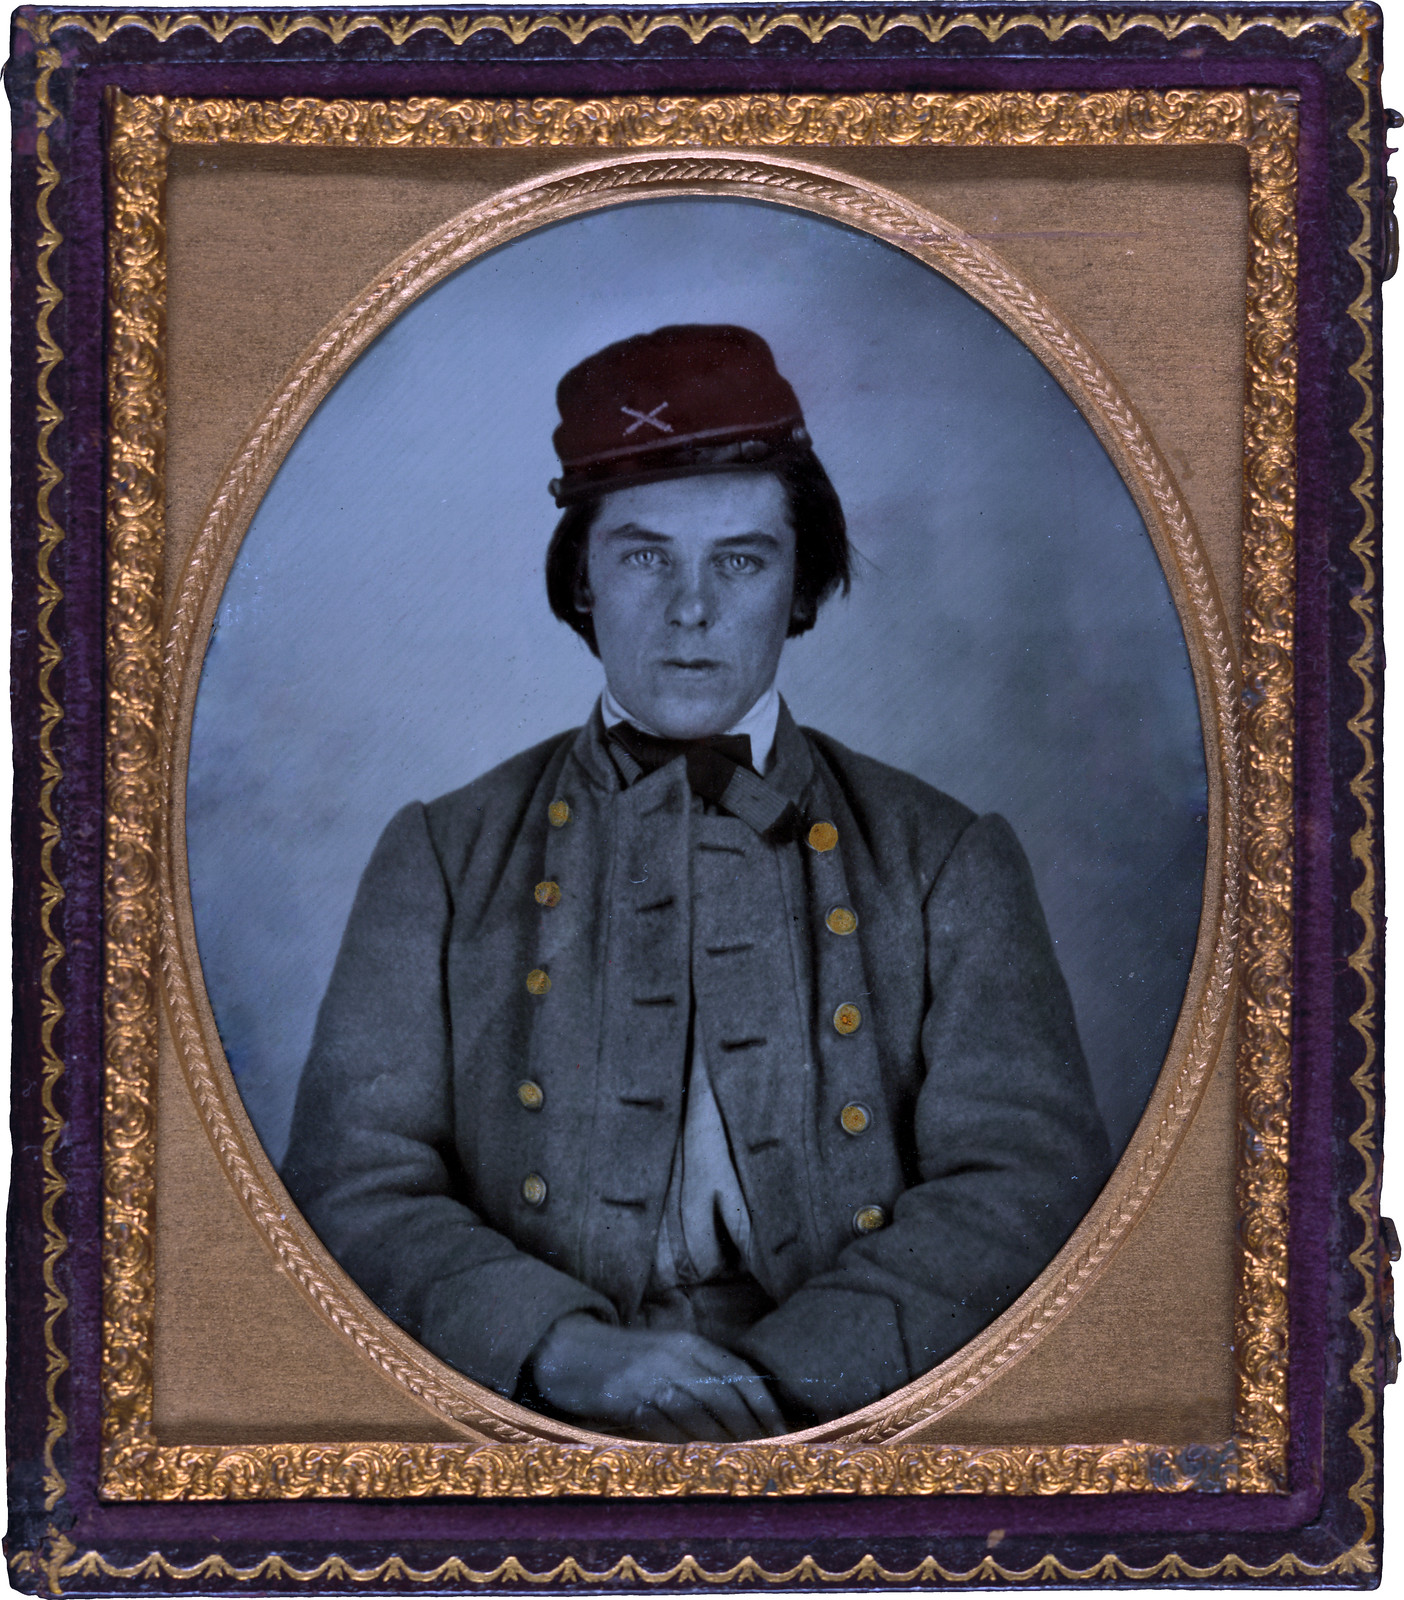 Unidentified artillery soldier in Confederate uniform and kepi hat.